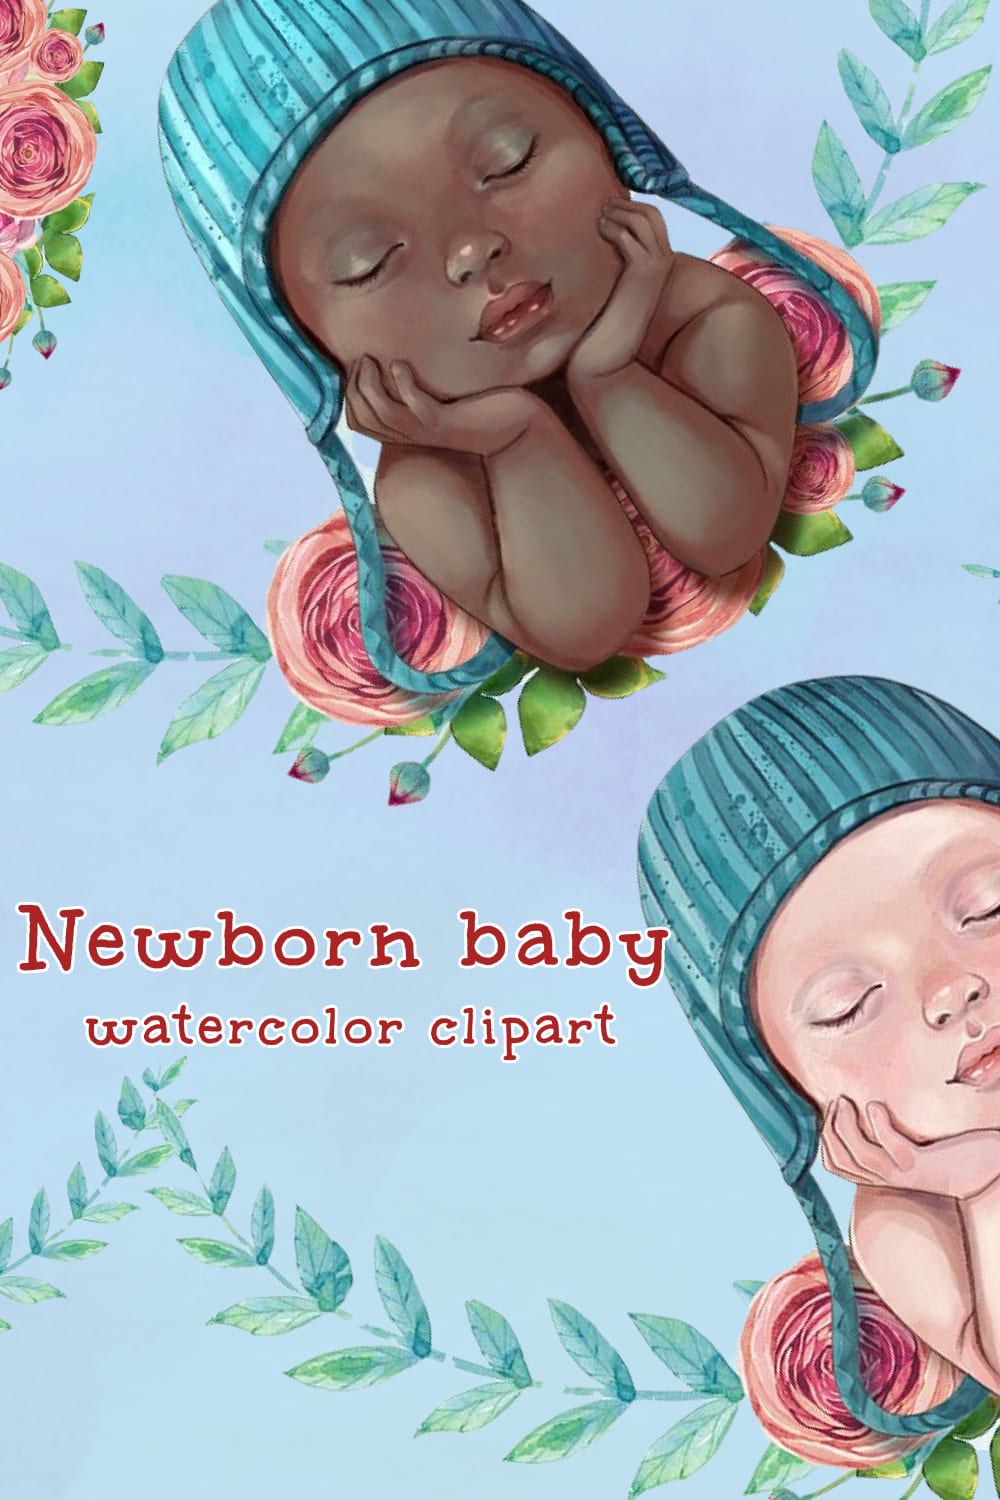 Newborn Baby Watercolor Clipart - Pinterest Image Preview.